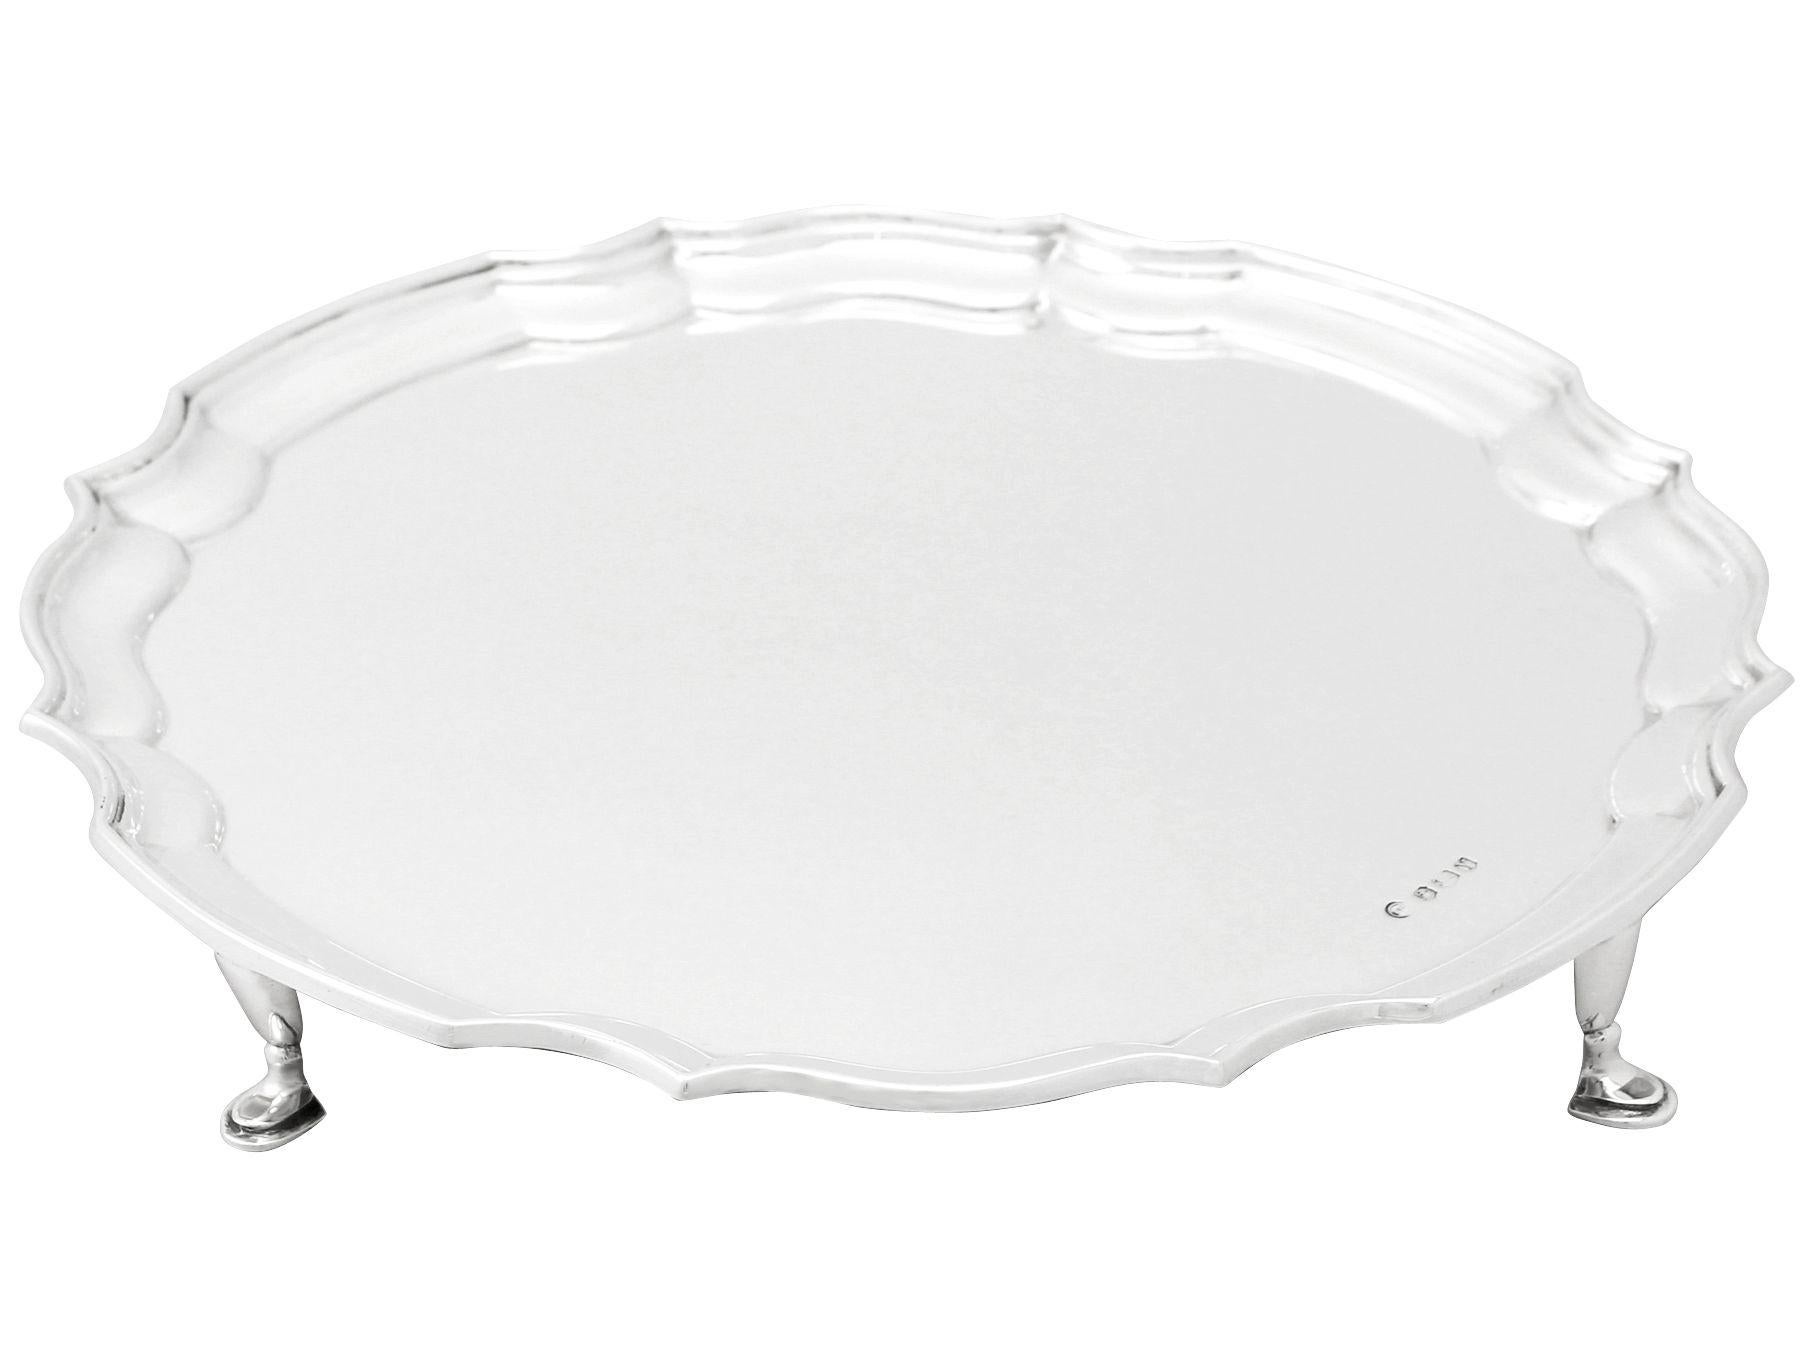 A fine and impressive vintage Elizabeth II English sterling silver salver, an addition to our silver dining collection.

This fine vintage Elizabeth II English sterling silver salver has a circular shaped form onto four feet.

The surface of this